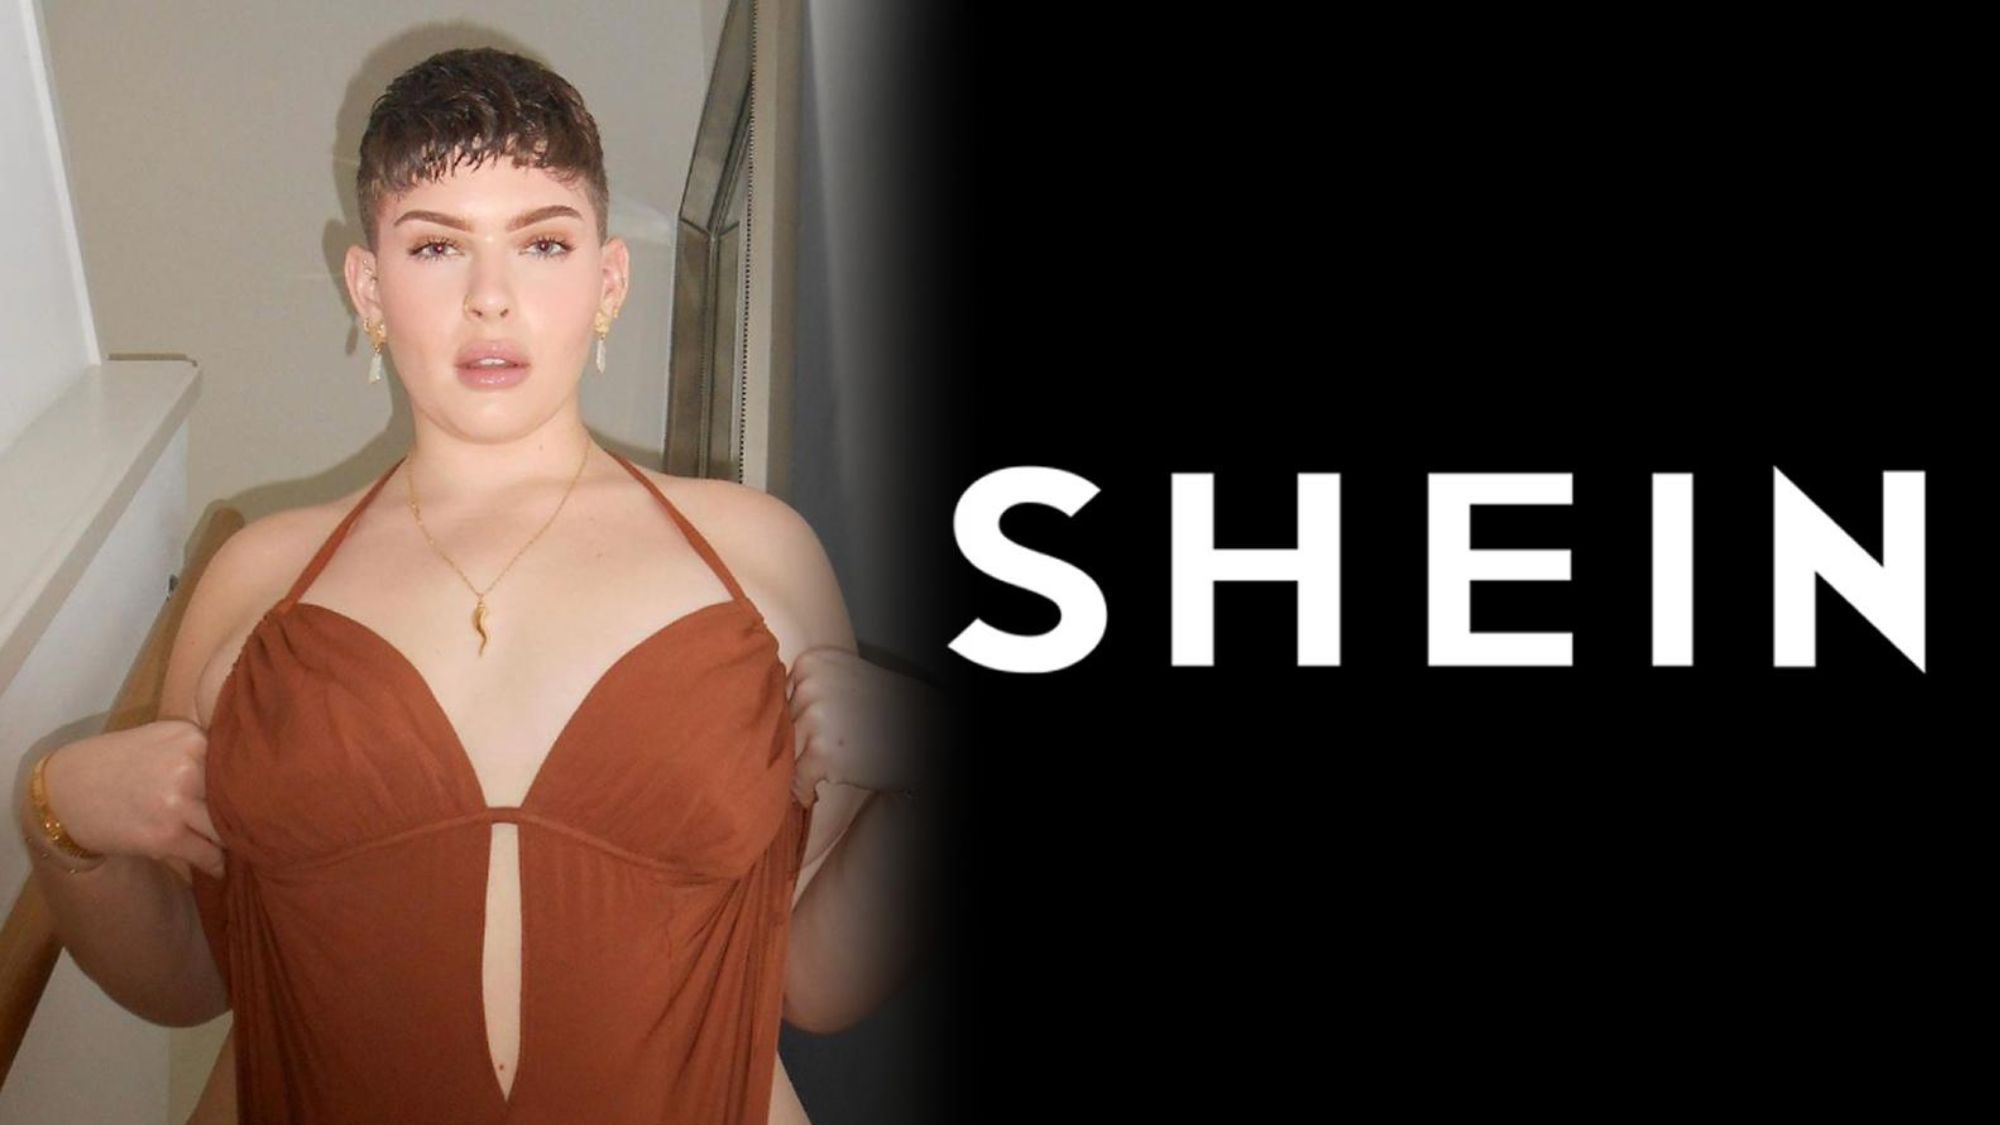 What can fashion learn from the Shein PR debacle?